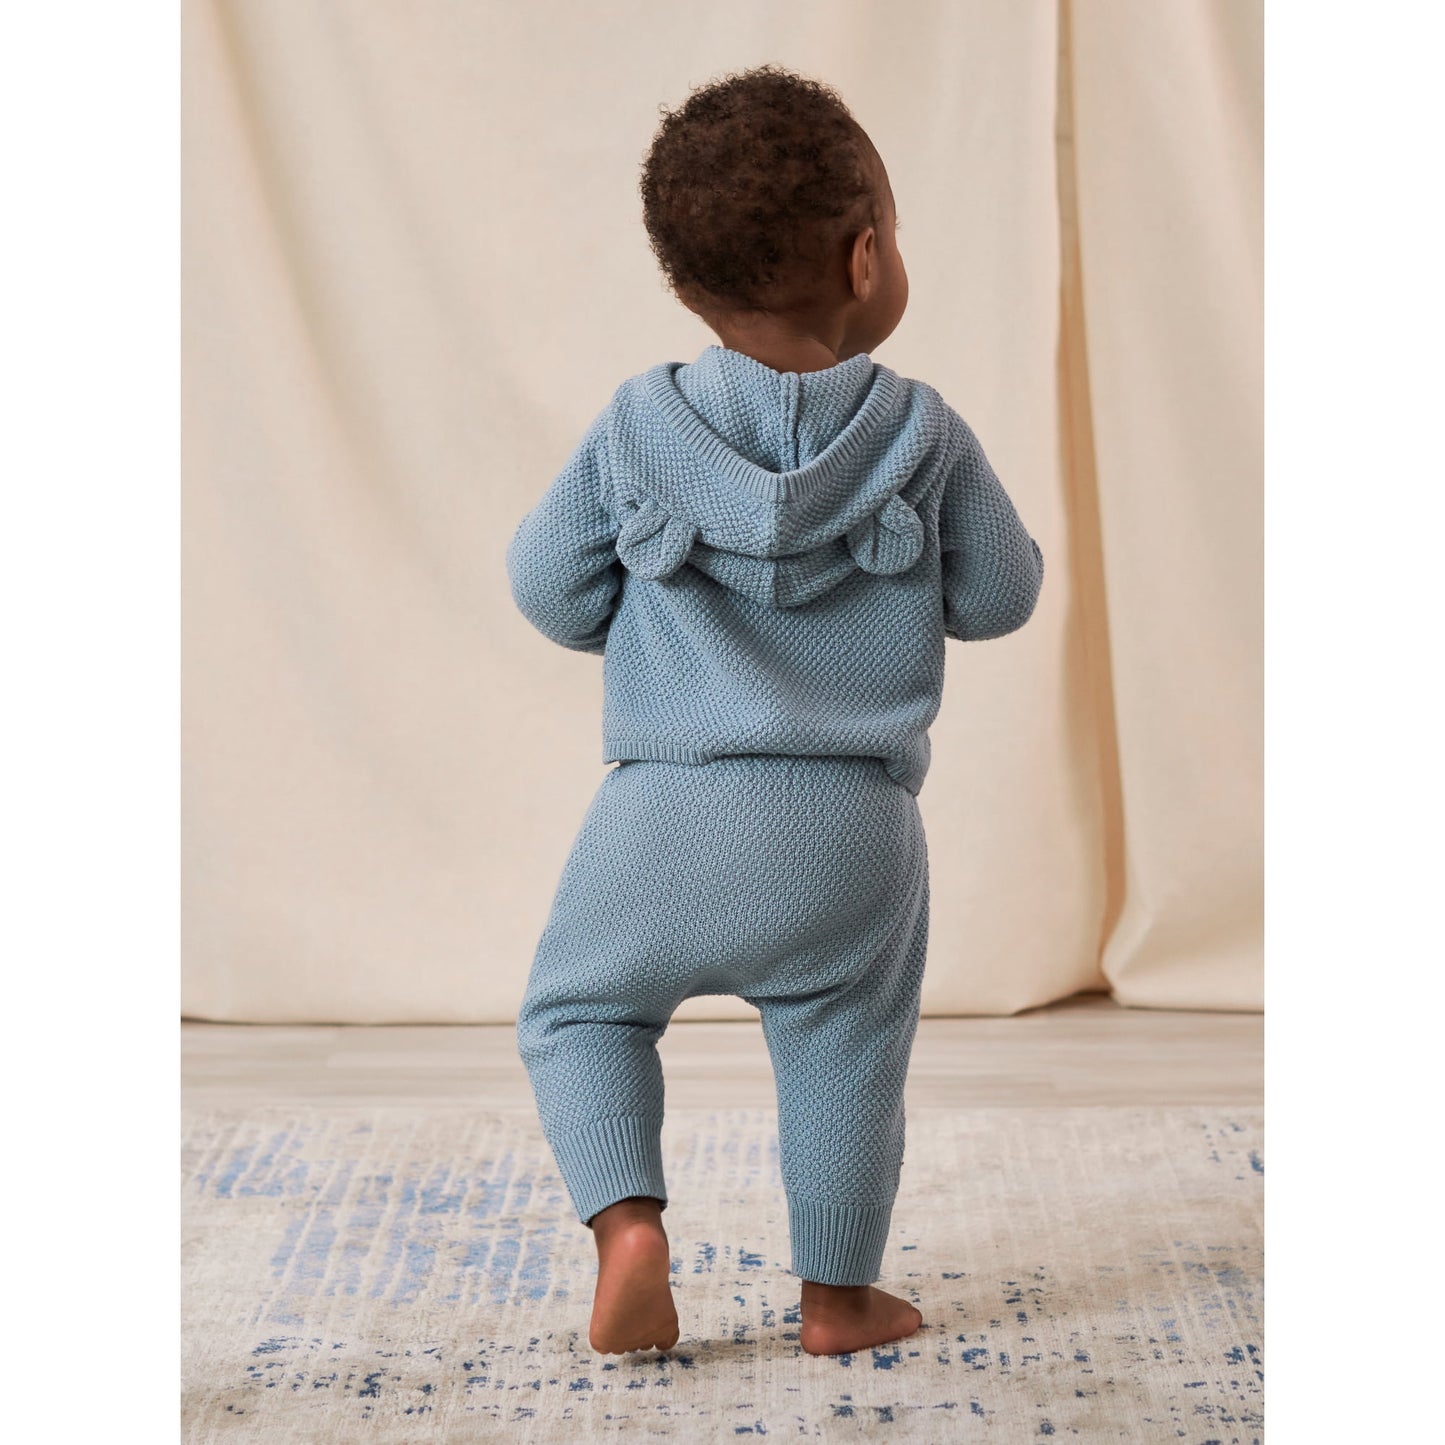 Modern Moments by Gerber Baby Boy Sweater Knit Cardigan, Bodysuit, & Pant Outfit Set, 3-Piece